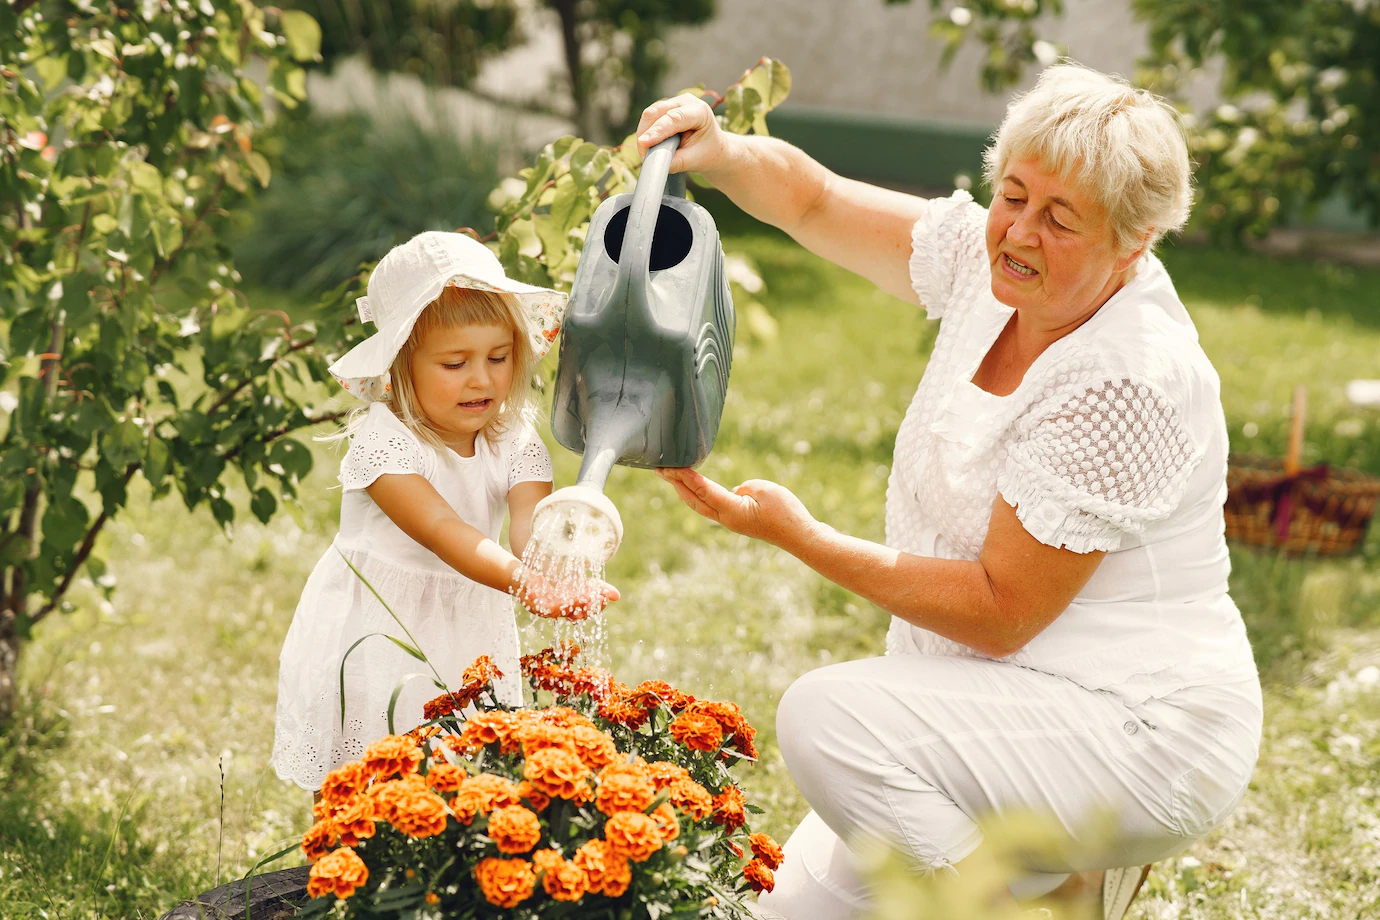 An elderly lady, in a garden, is watering some flowers with a watering can. A young girl is nearby and is holding her hands out under the water